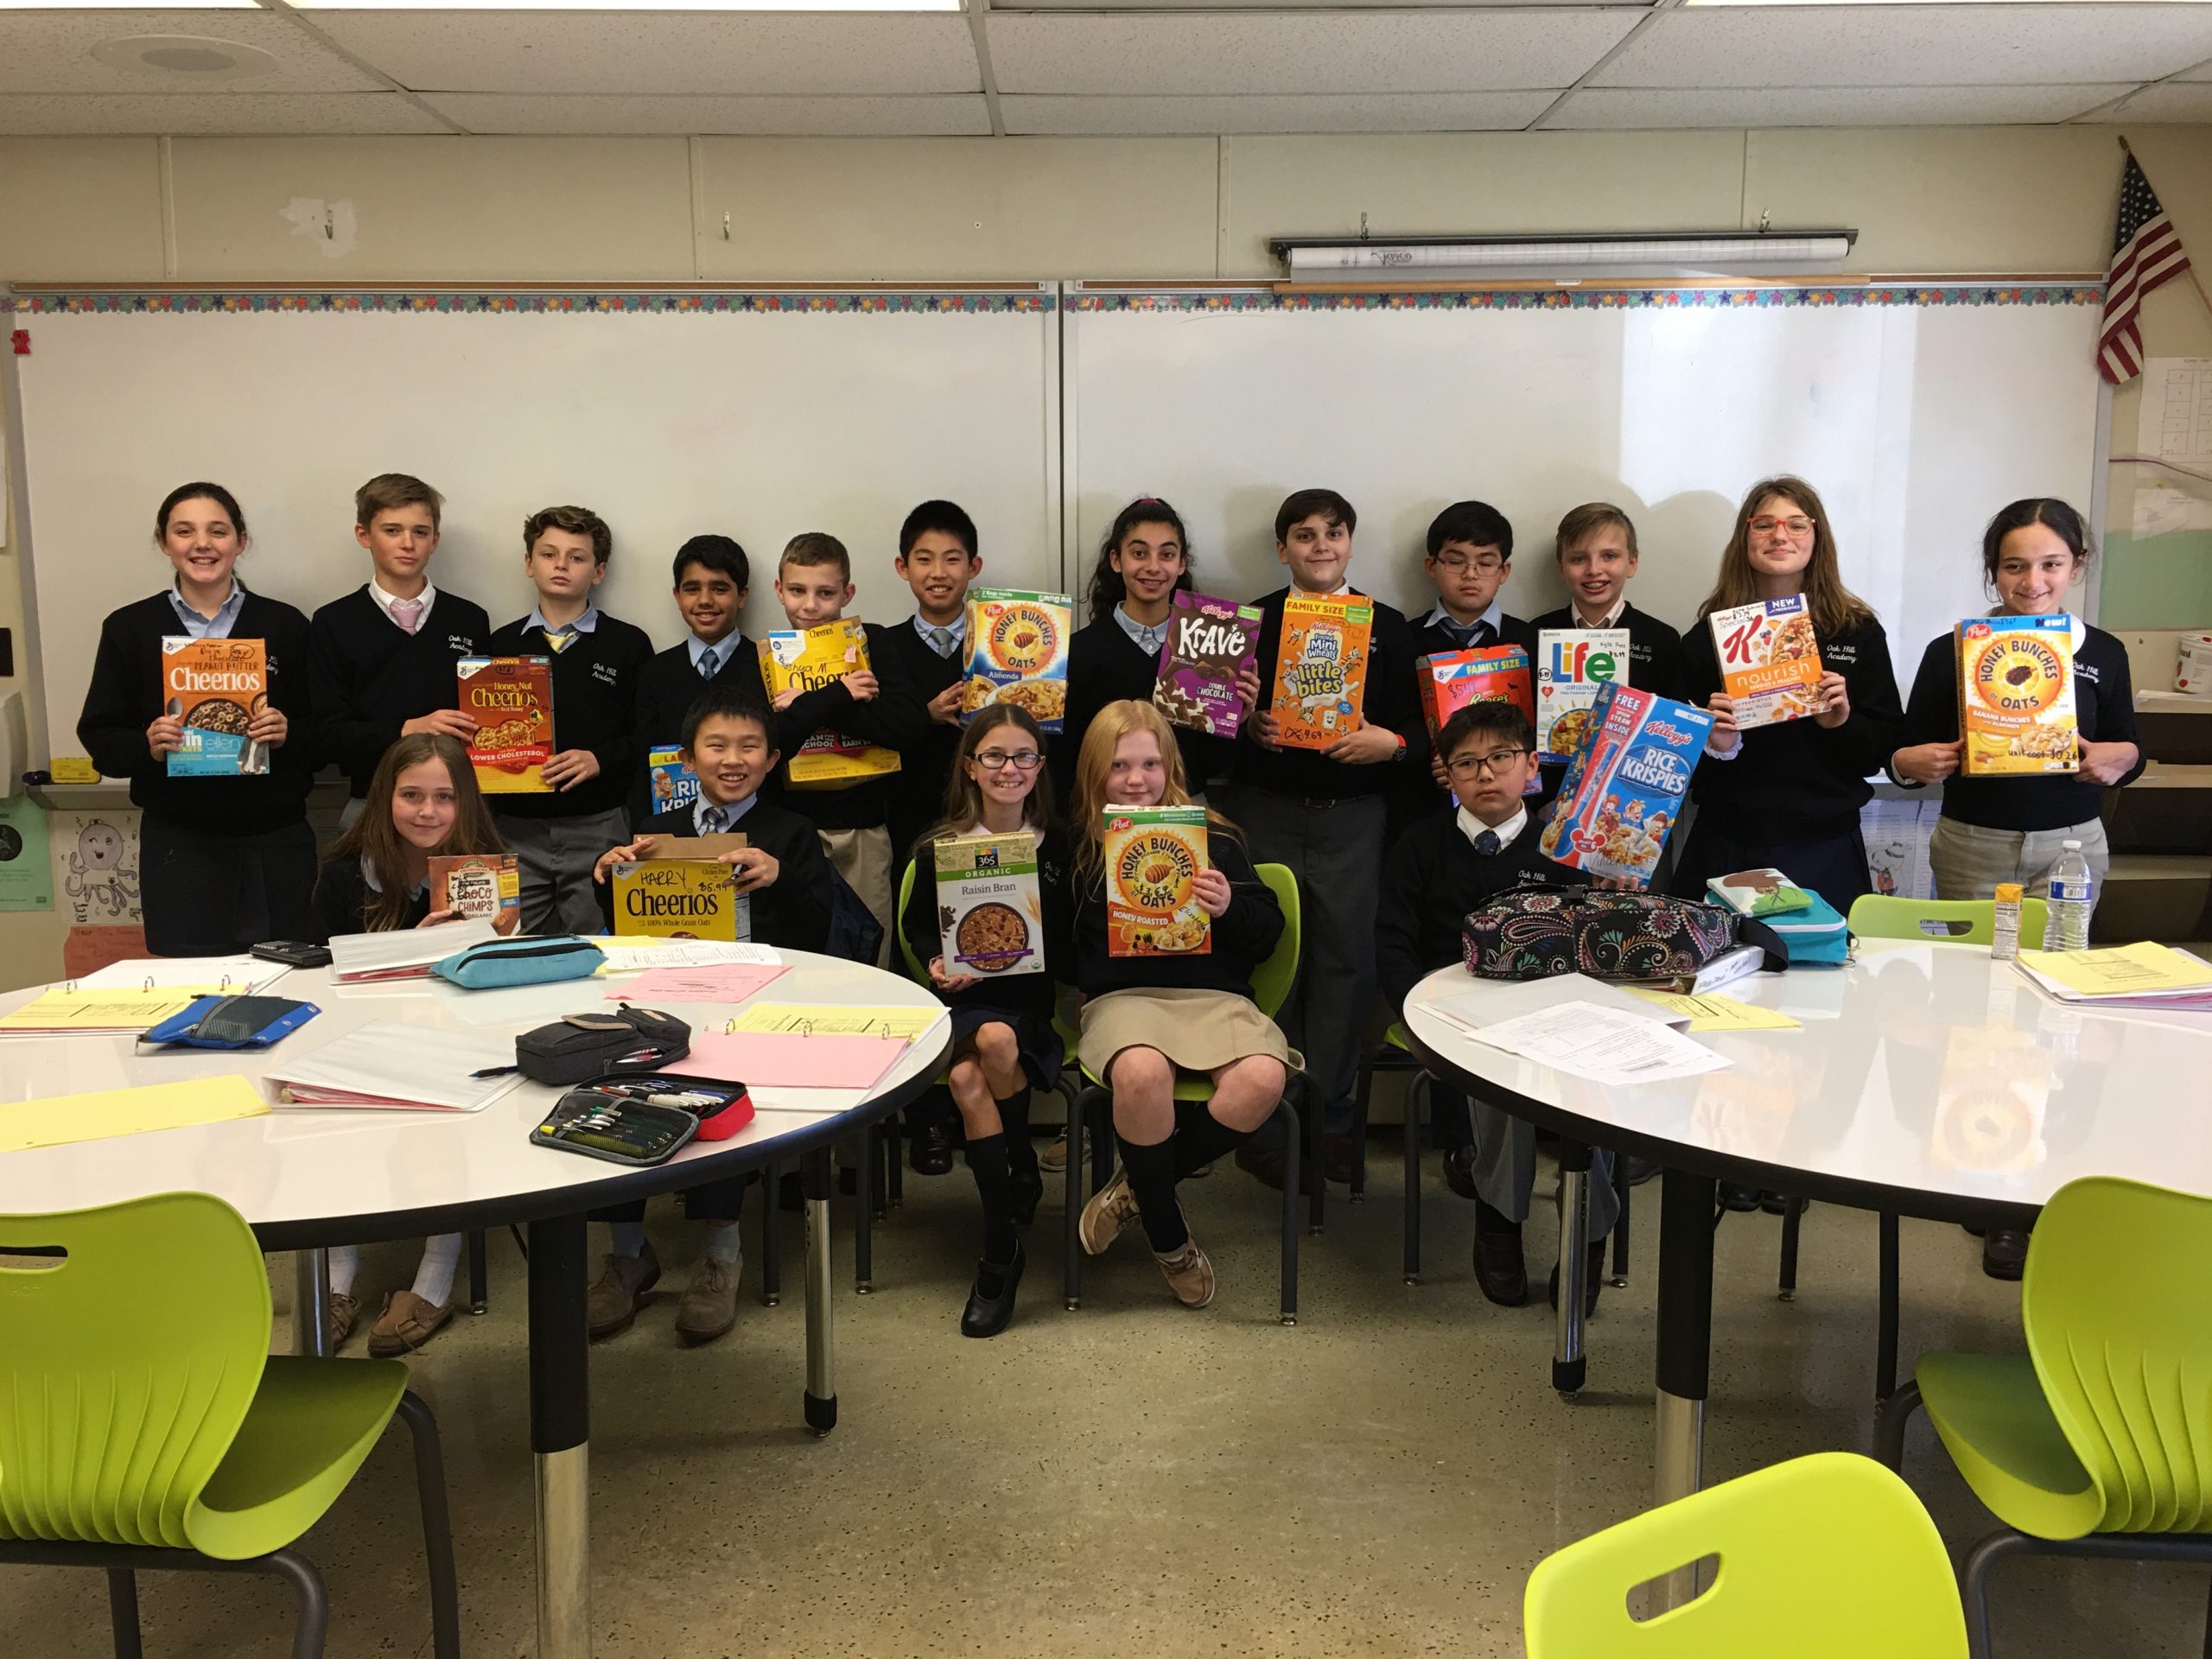 Mathematics of Nutrition project at Monmouth County Private School